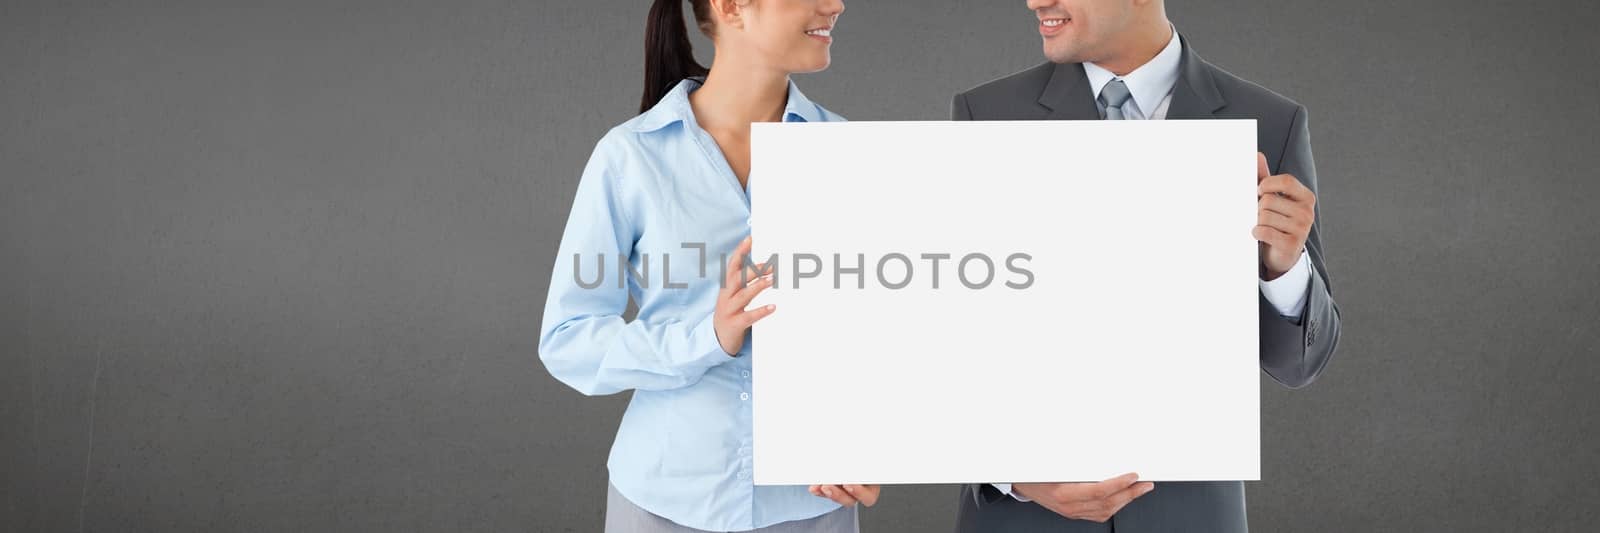 Digital composite of Business people holding a blank card against grey background